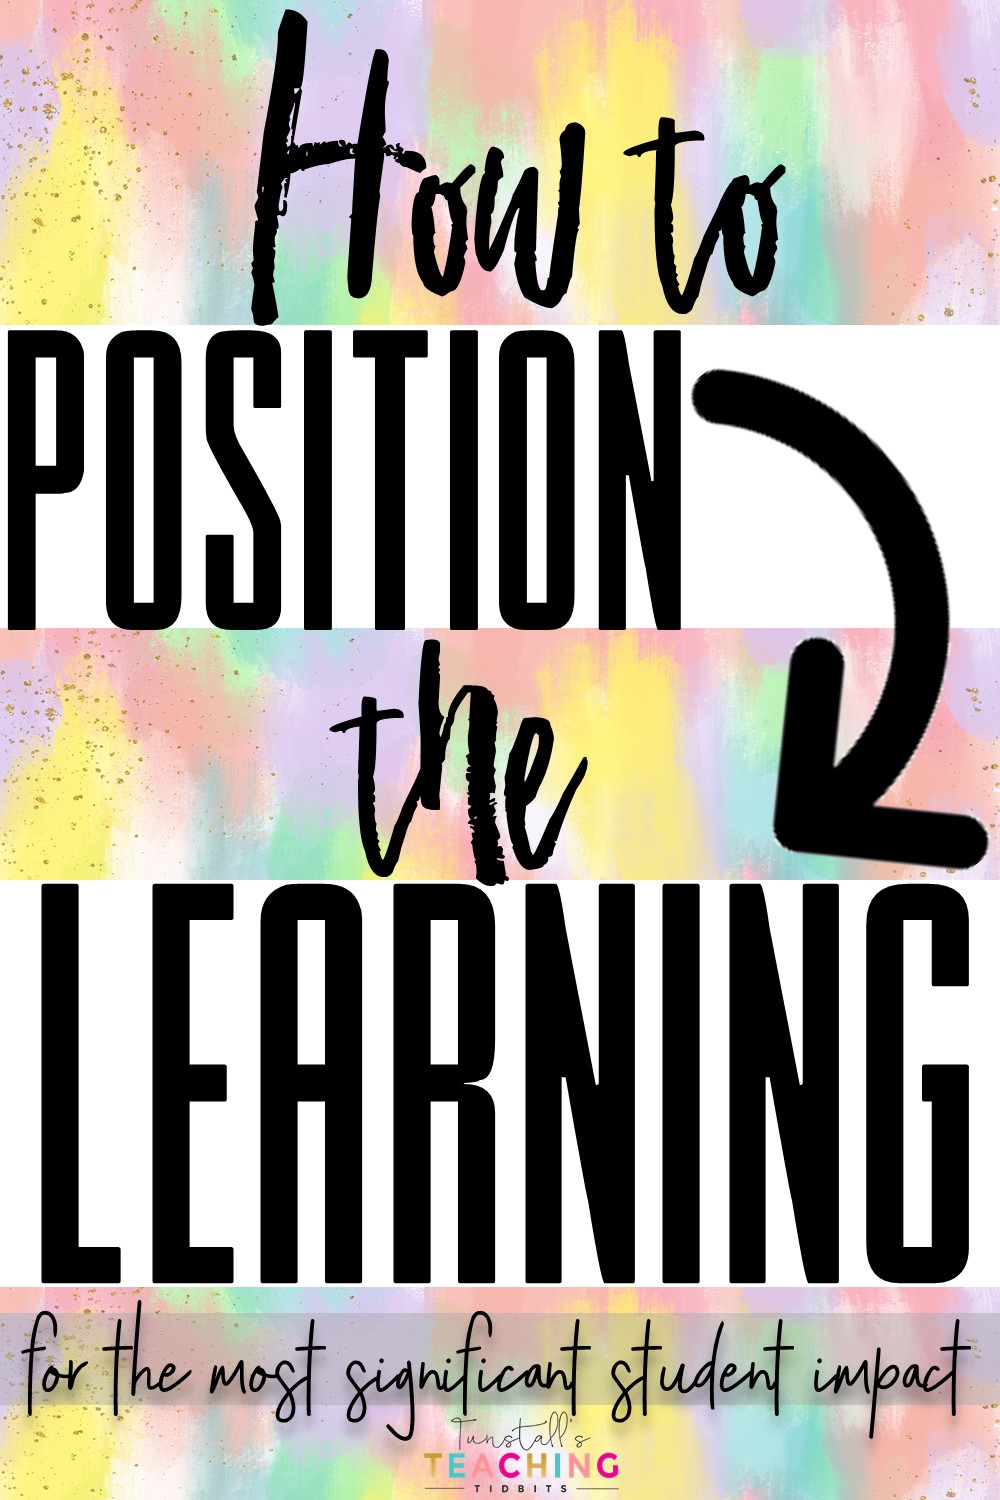 Position the Learning for Impact